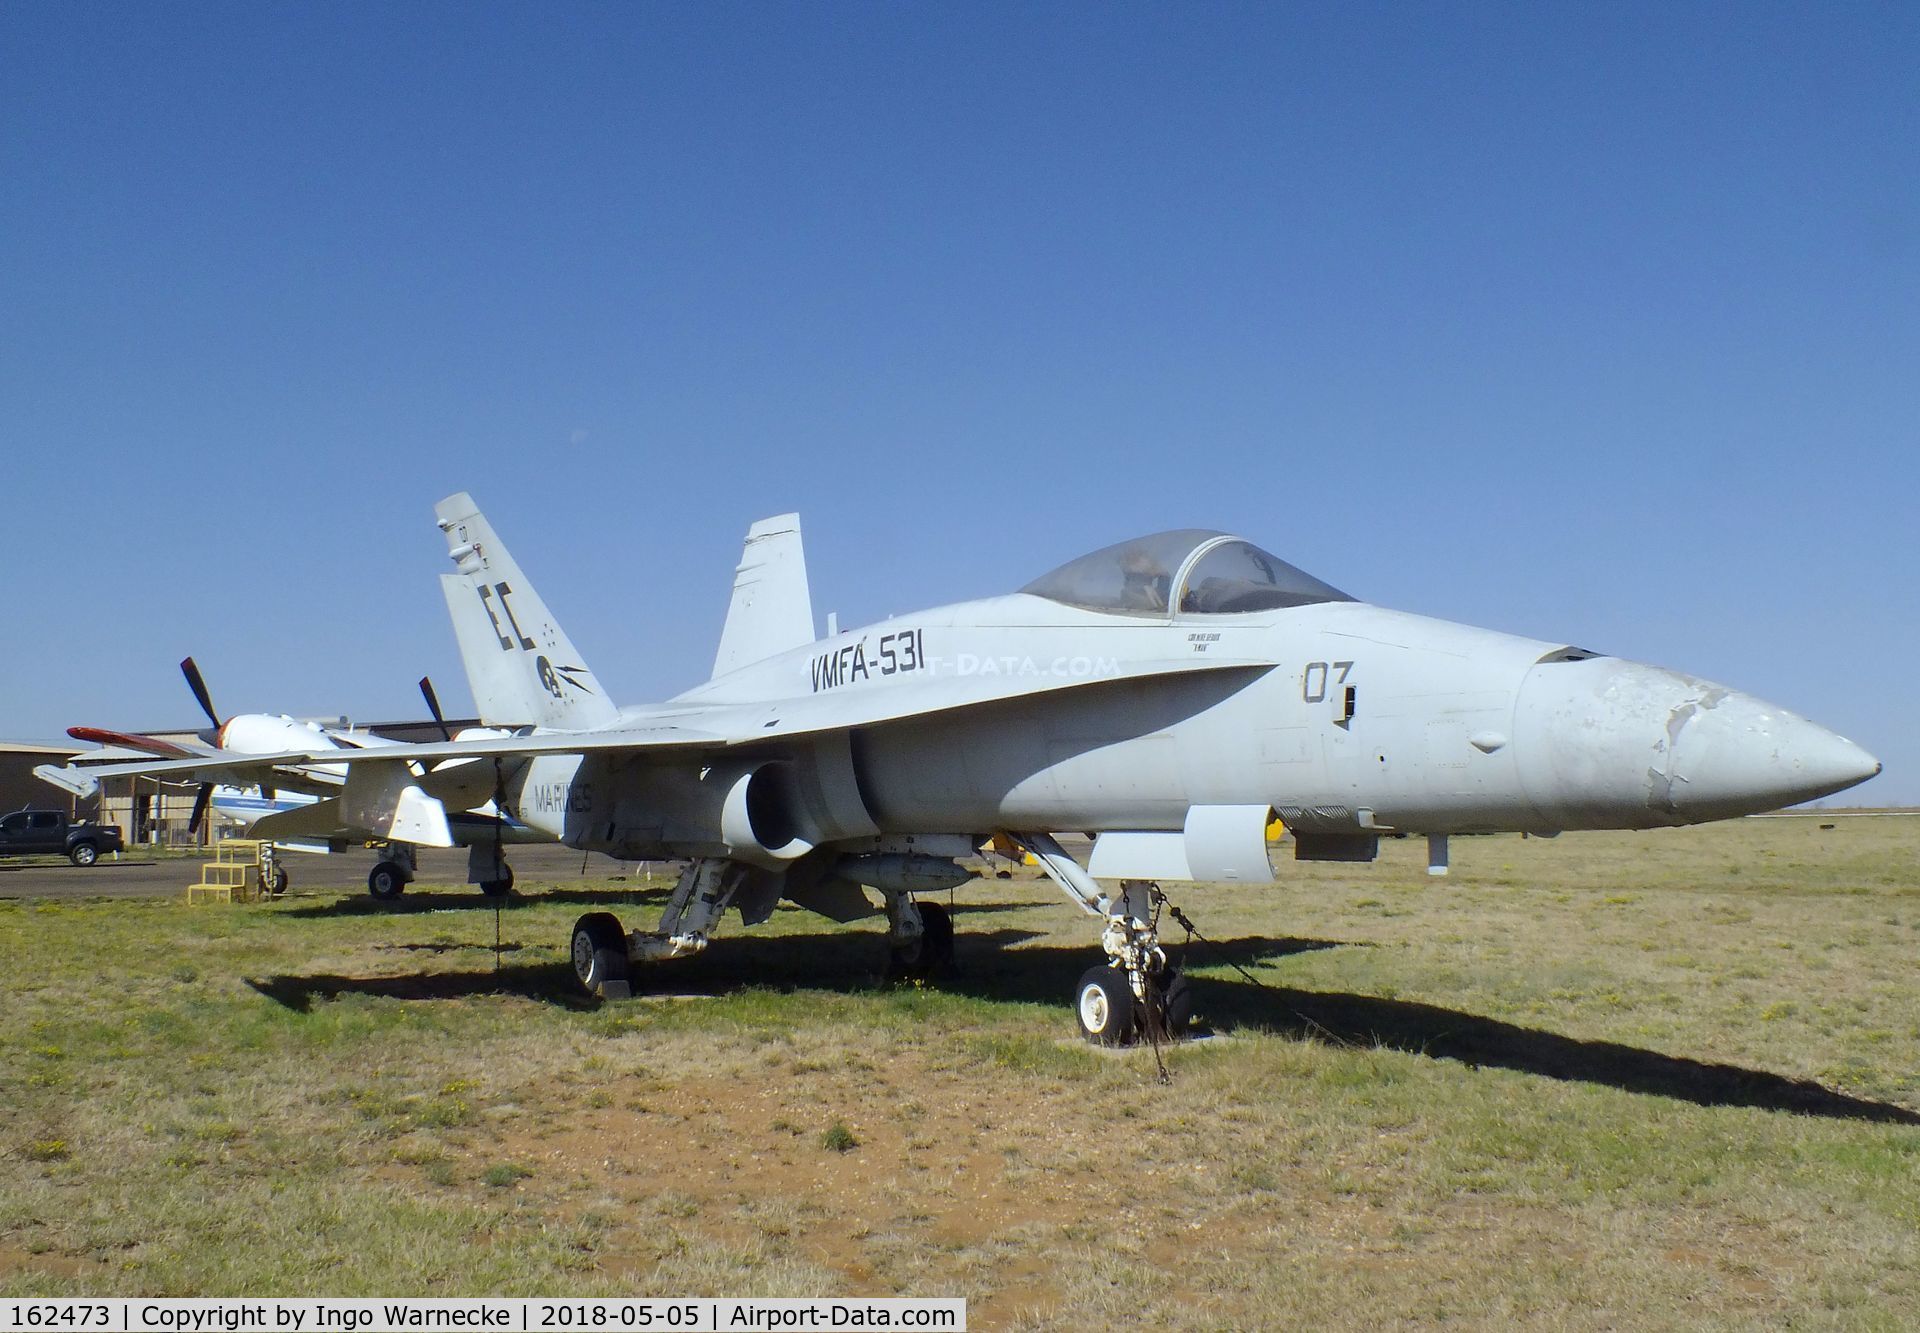 162473, McDonnell Douglas F/A-18A Hornet C/N 0331, McDonnell Douglas F/A-18A Hornet (probably containing parts of an other aircraft) at the Texas Air Museum Caprock Chapter, Slaton TX